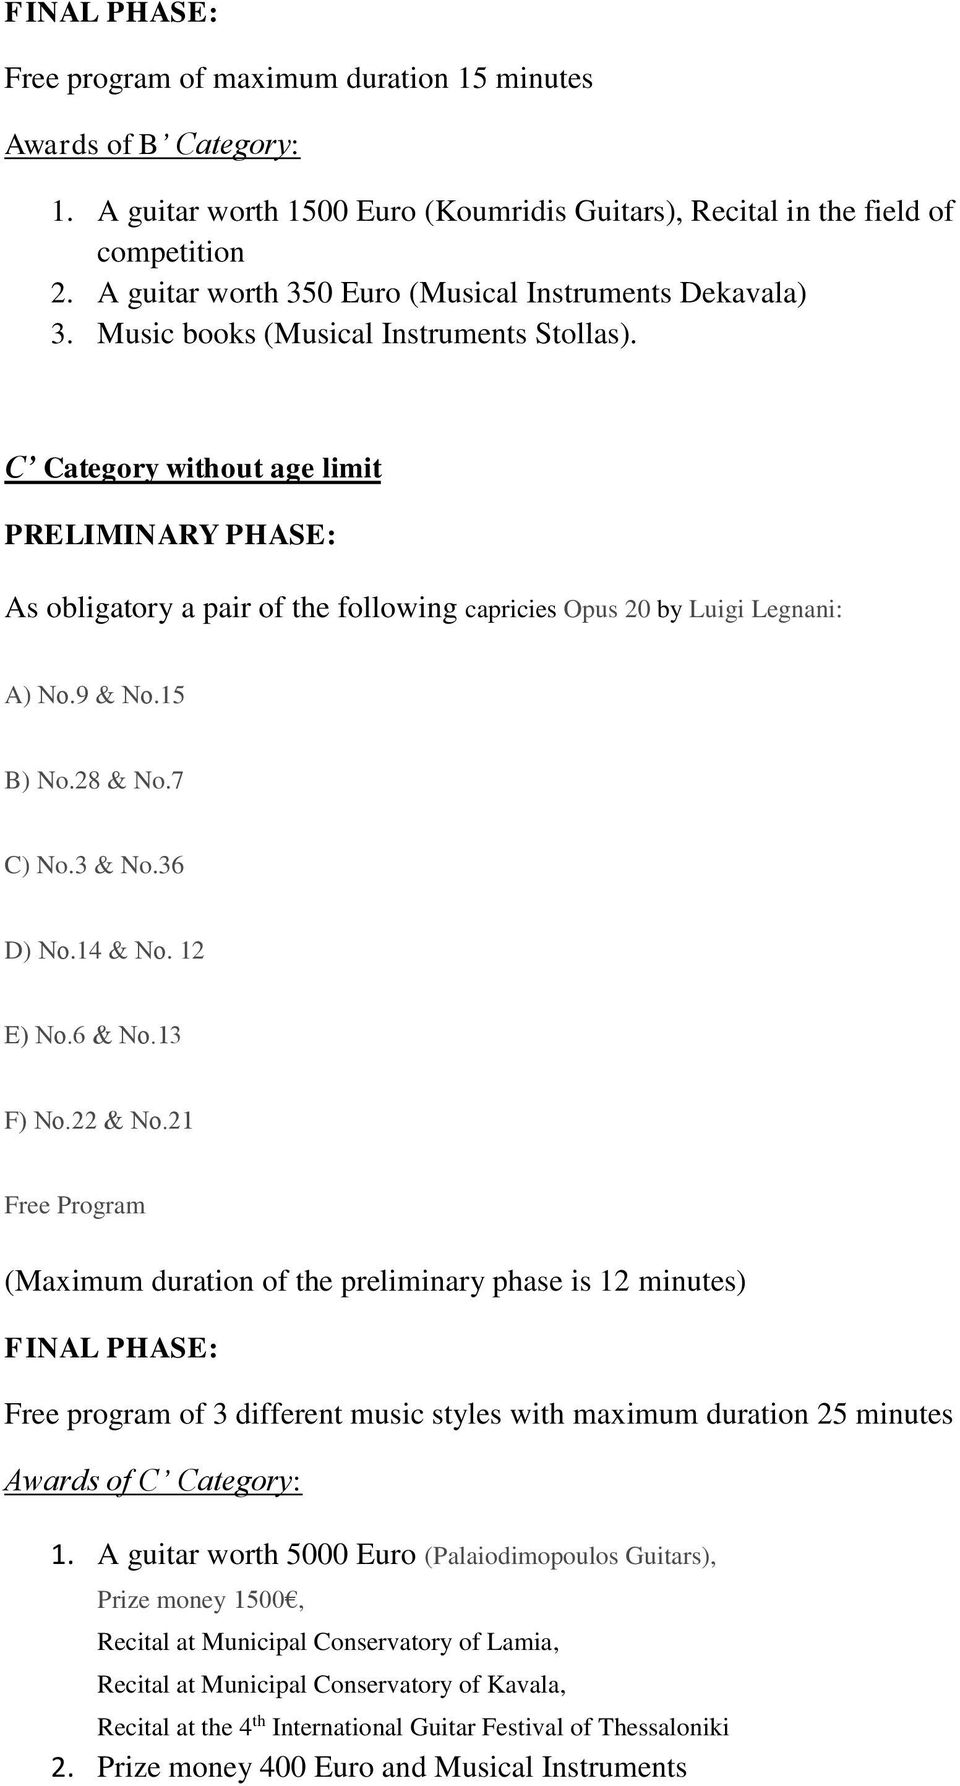 C Category without age limit PRELIMINARY PHASE: As obligatory a pair of the following capricies Opus 20 by Luigi Legnani: A) Νο.9 & Νο.15 B) No.28 & No.7 C) No.3 & No.36 D) Νο.14 & Νο. 12 Ε) Νο.